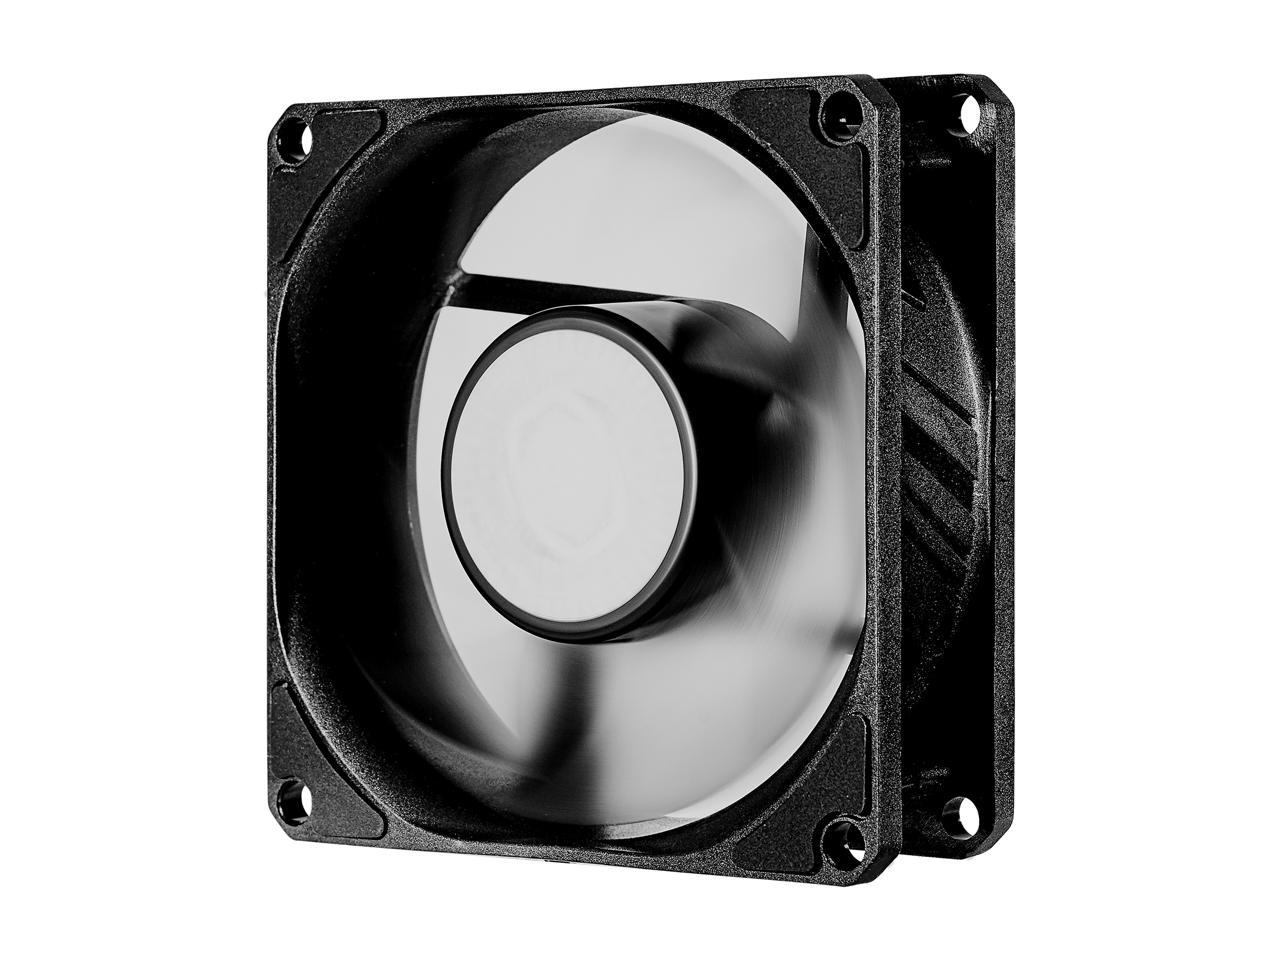 Cooler Master SickleFlow 80 V2 All-Black Square Frame Fan with Air Balance Curve Blade Design, Sealed Bearing, PWM Control for Computer Case & Air Coolers